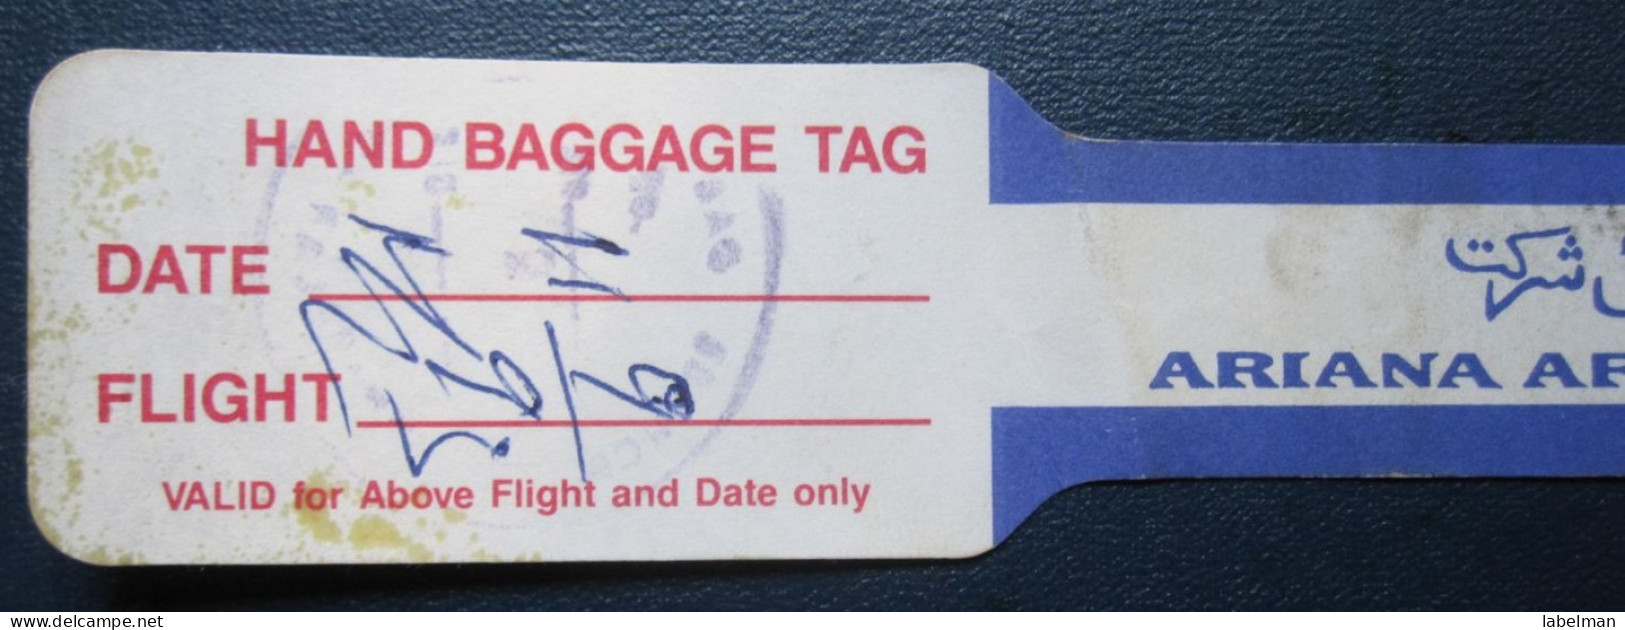 ARIANA AFGHAN AFGHANISTAN CARD WELCOME TICKET AIRWAYS AIRLINE STICKER LABEL TAG LUGGAGE BUGGAGE PLANE AIRCRAFT AIRPORT - Baggage Etiketten